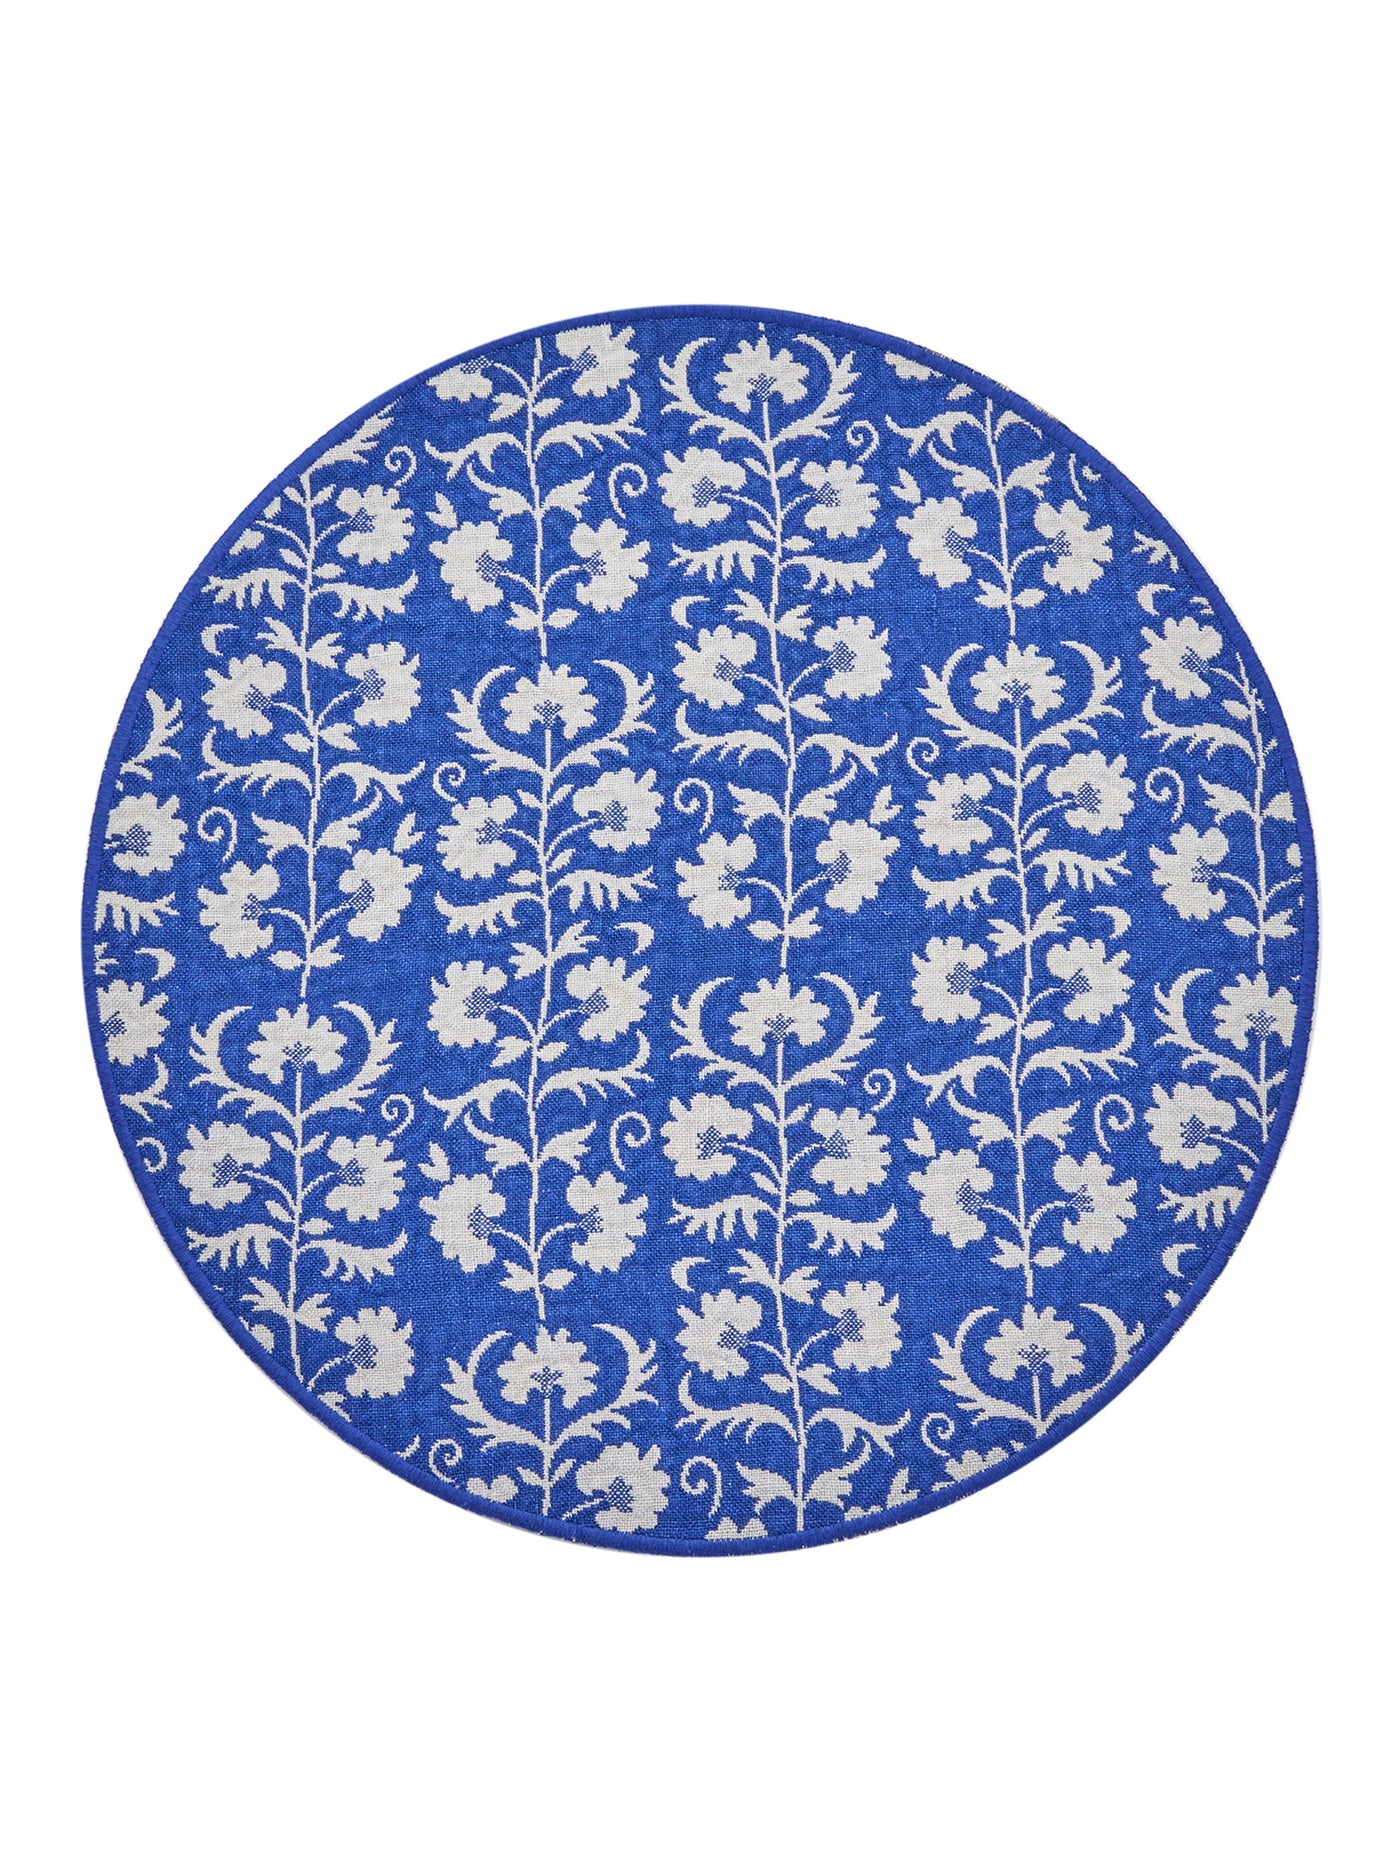 Italian Reversible Suzani Placemat Set in Blue by Permanent Resident